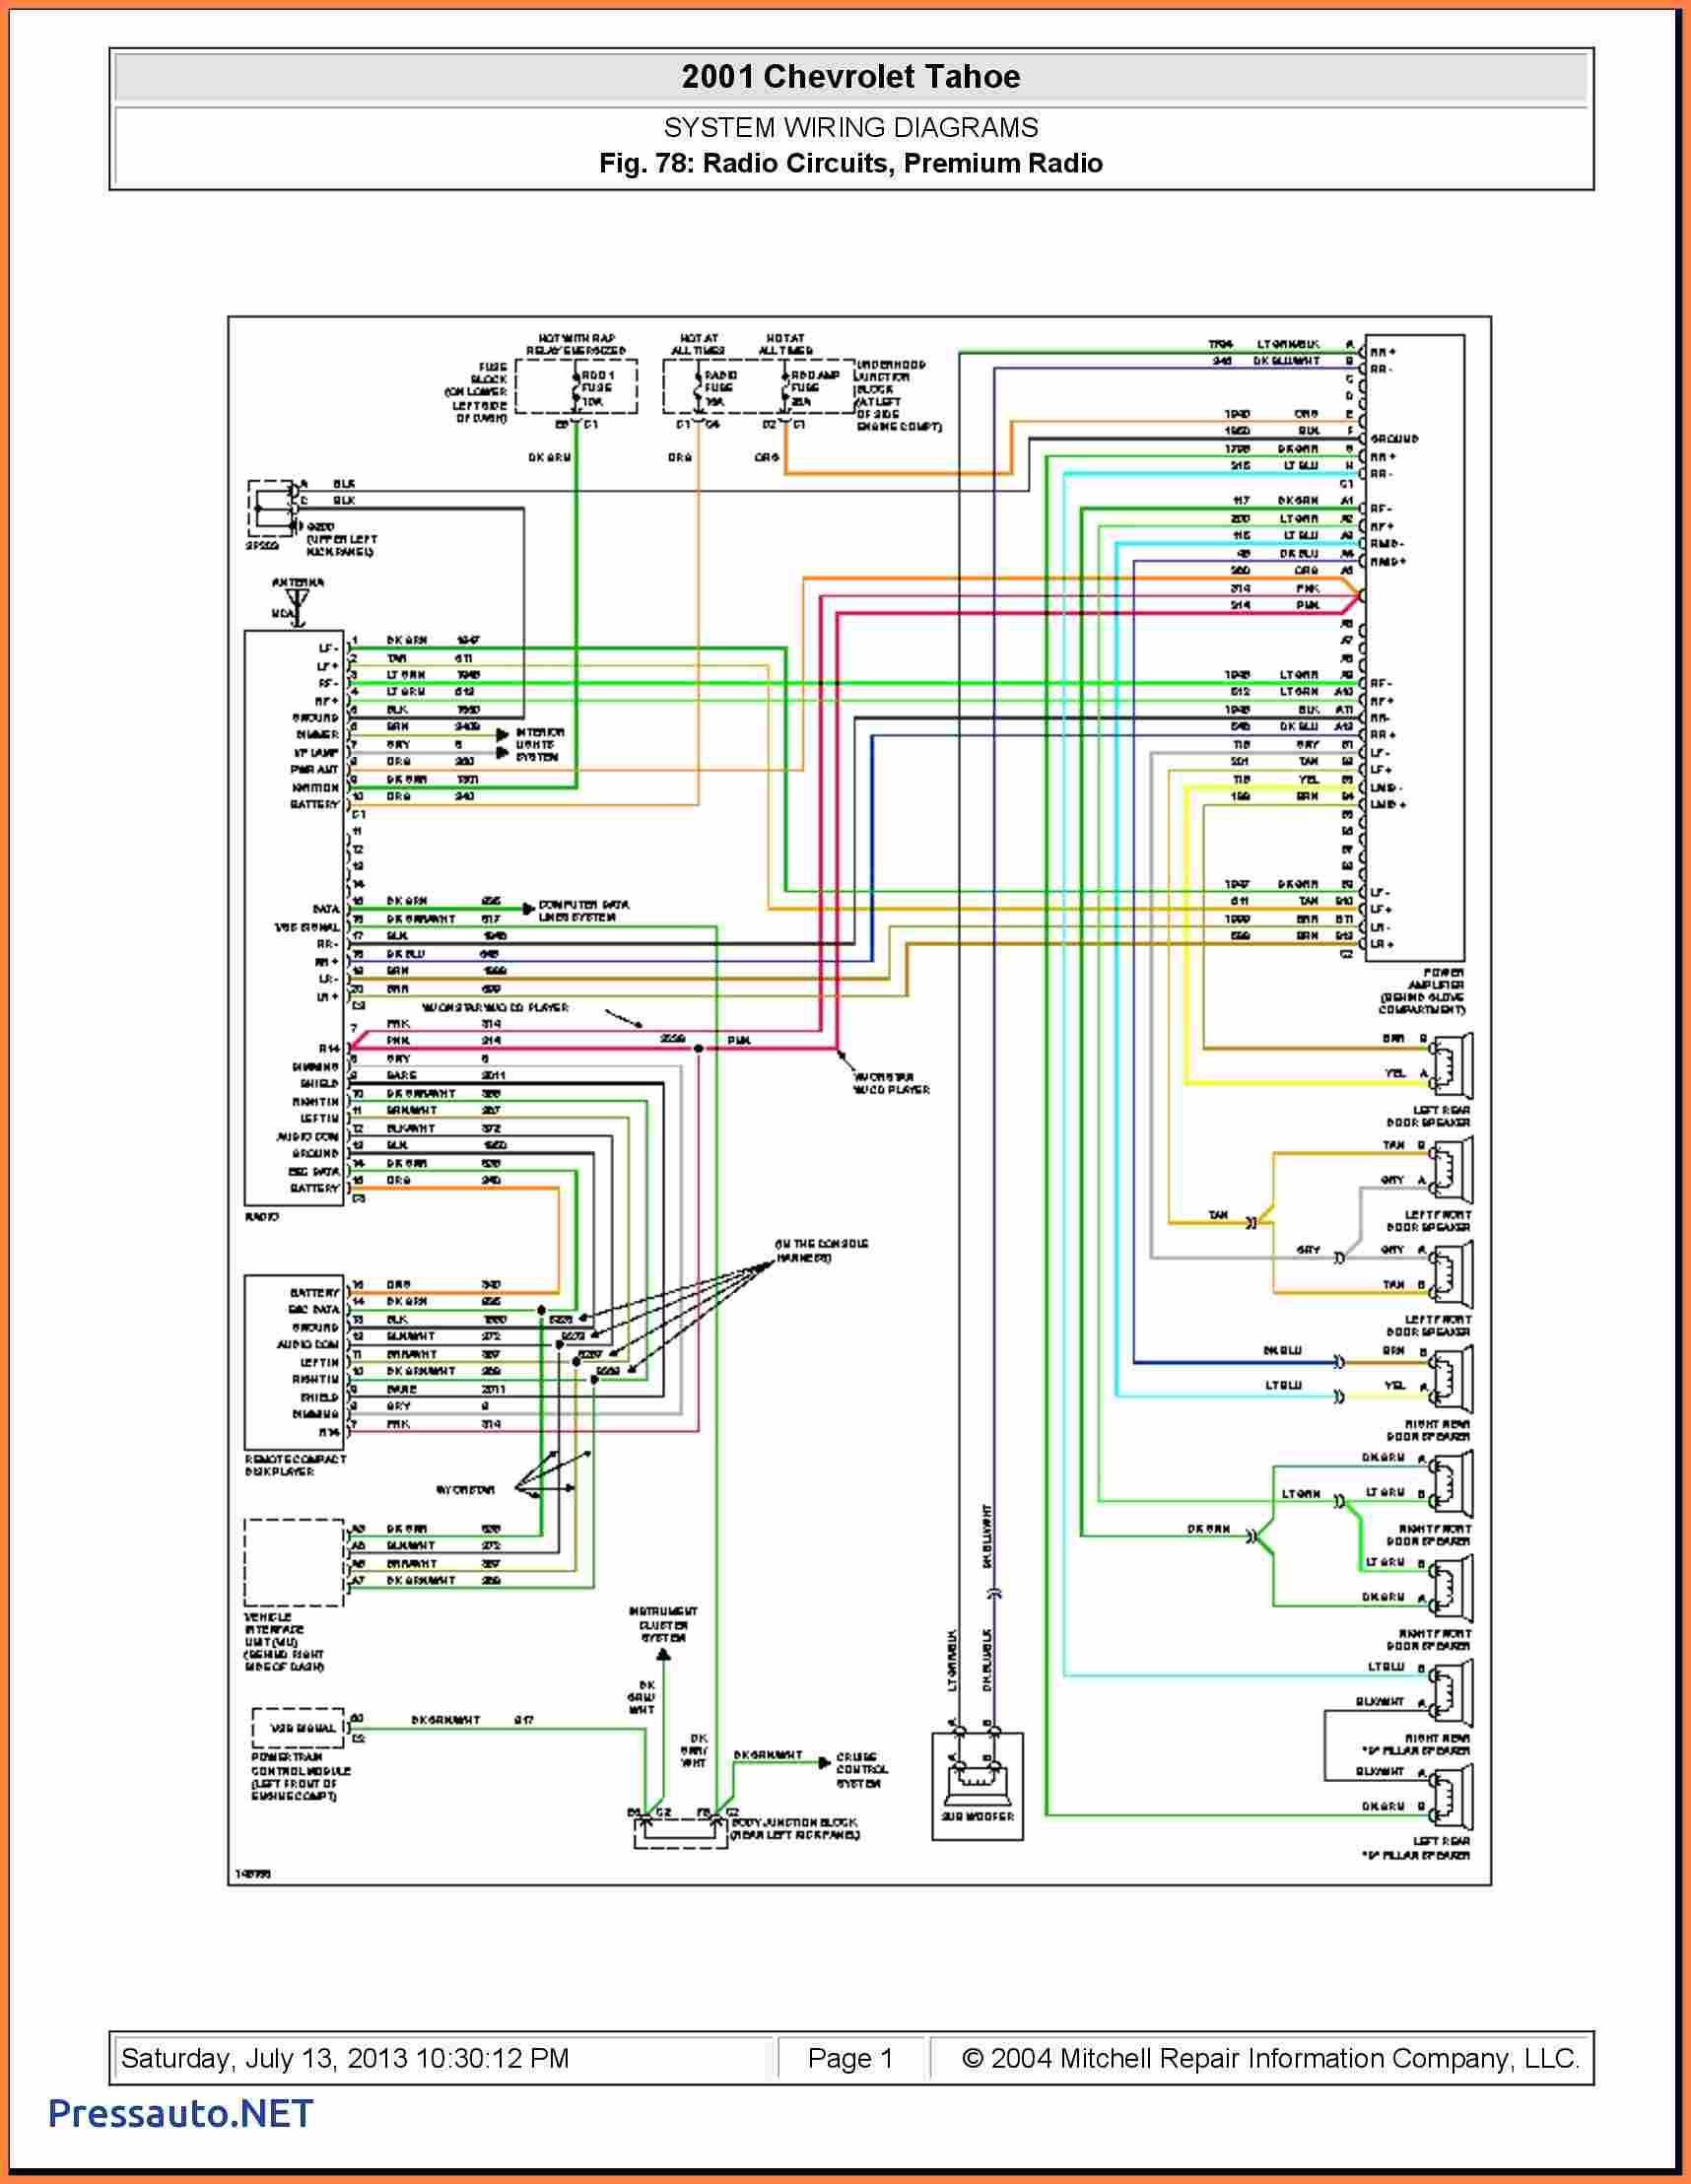 2005 Chevy Impala Stereo Wiring Diagram Simplified Shapes 9 2002 - 2005 Chevy Trailblazer Stereo Wiring Diagram